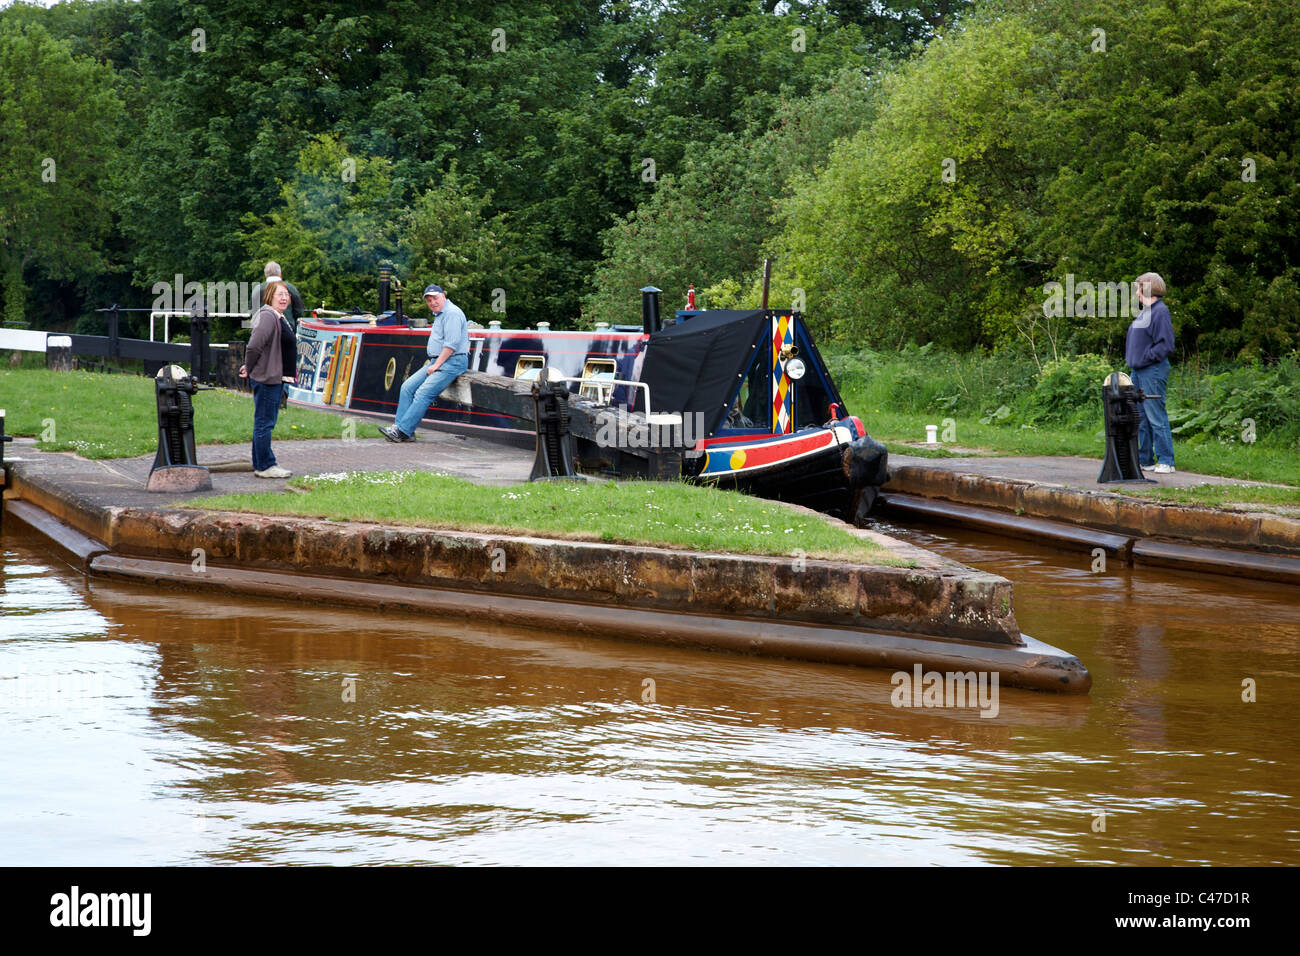 Narrow boat at Lawton locks on the Trent and Mersey Canal in Cheshire UK Stock Photo